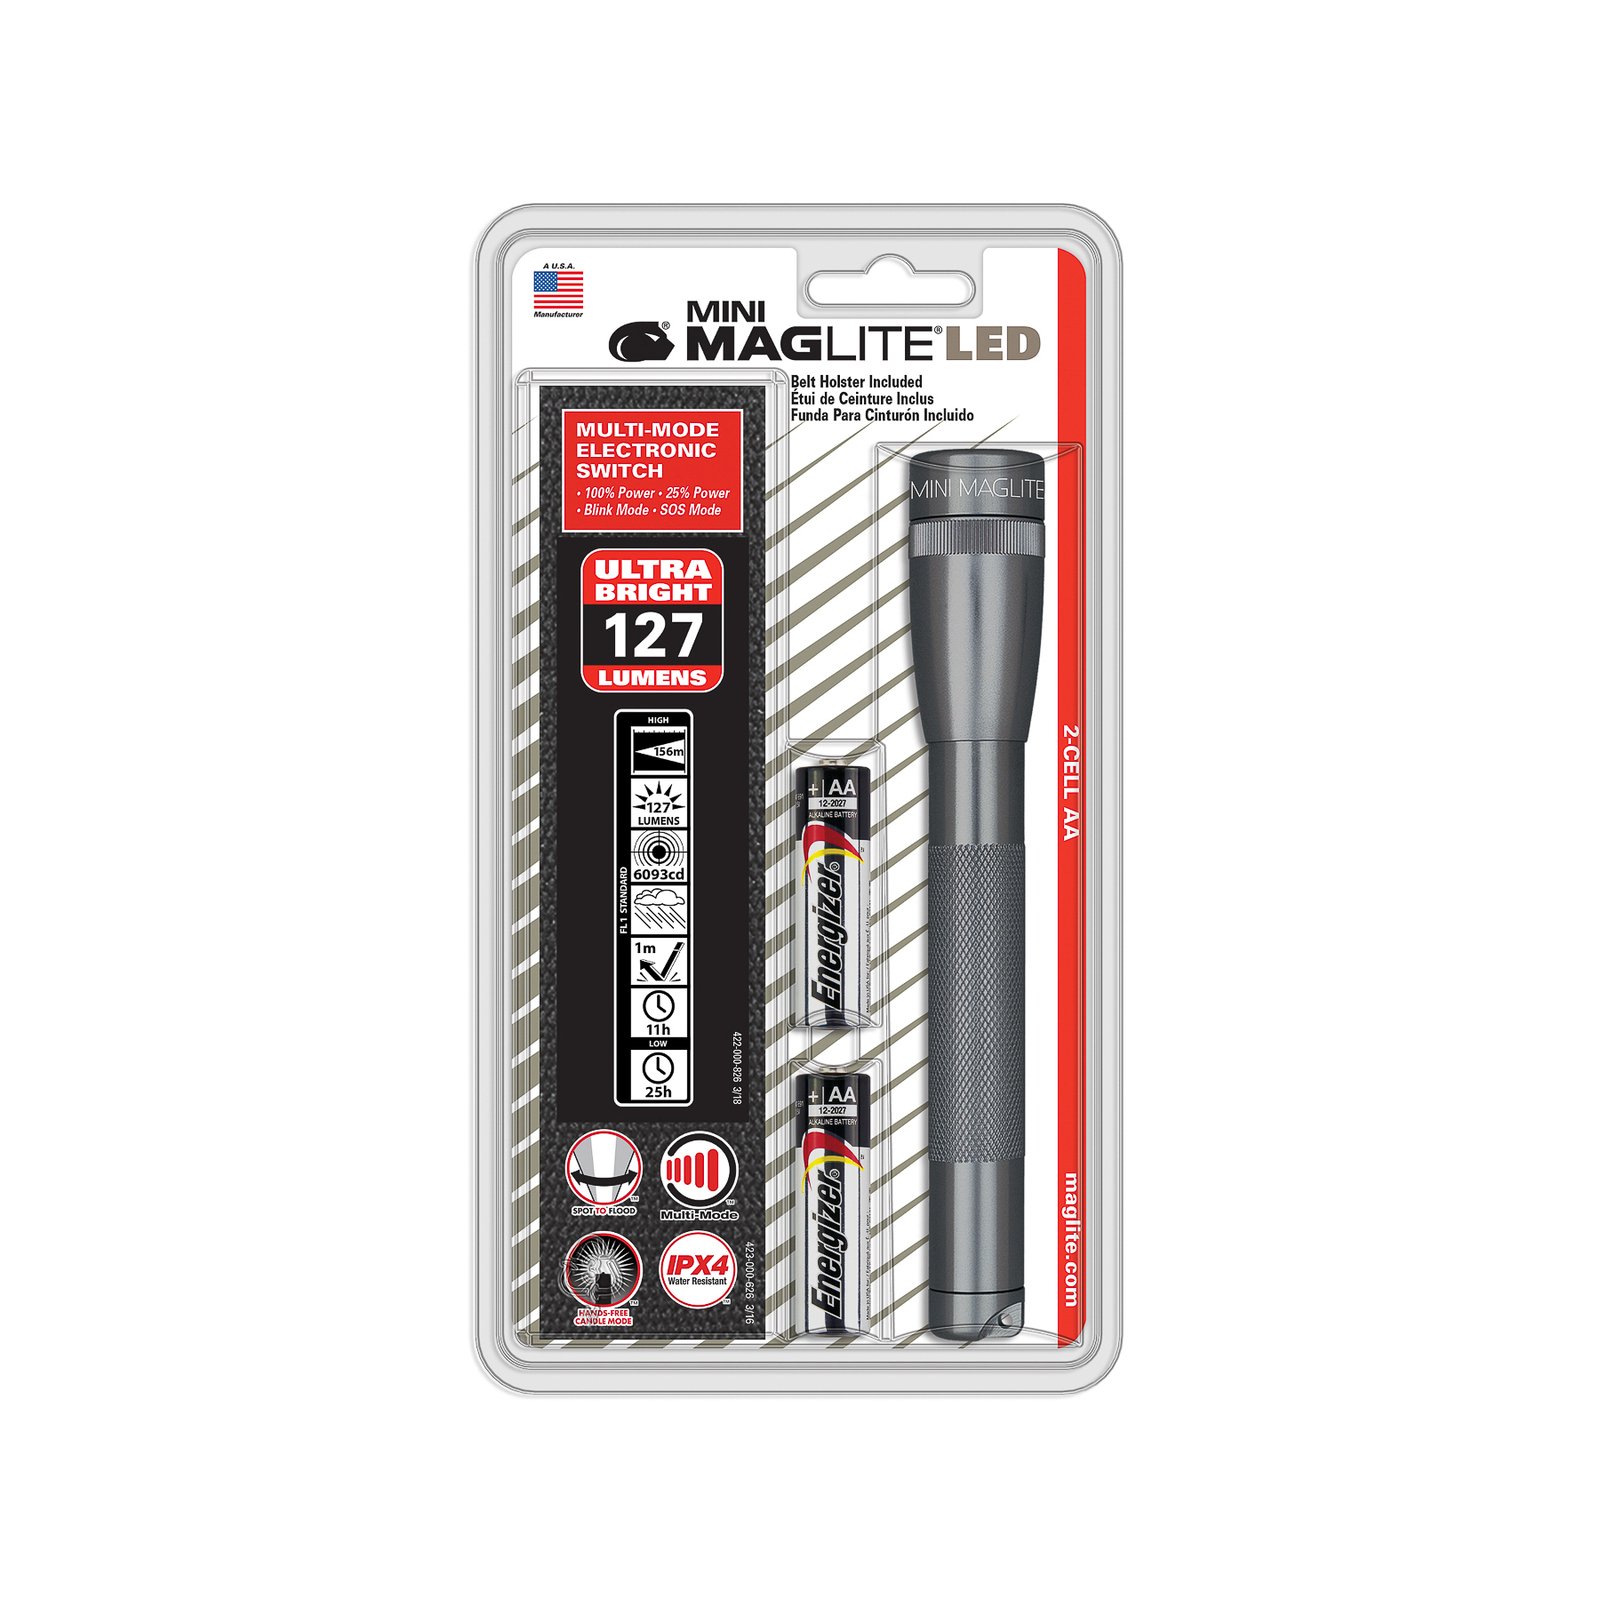 Maglite LED torch Mini, 2-Cell AA, holster, grey